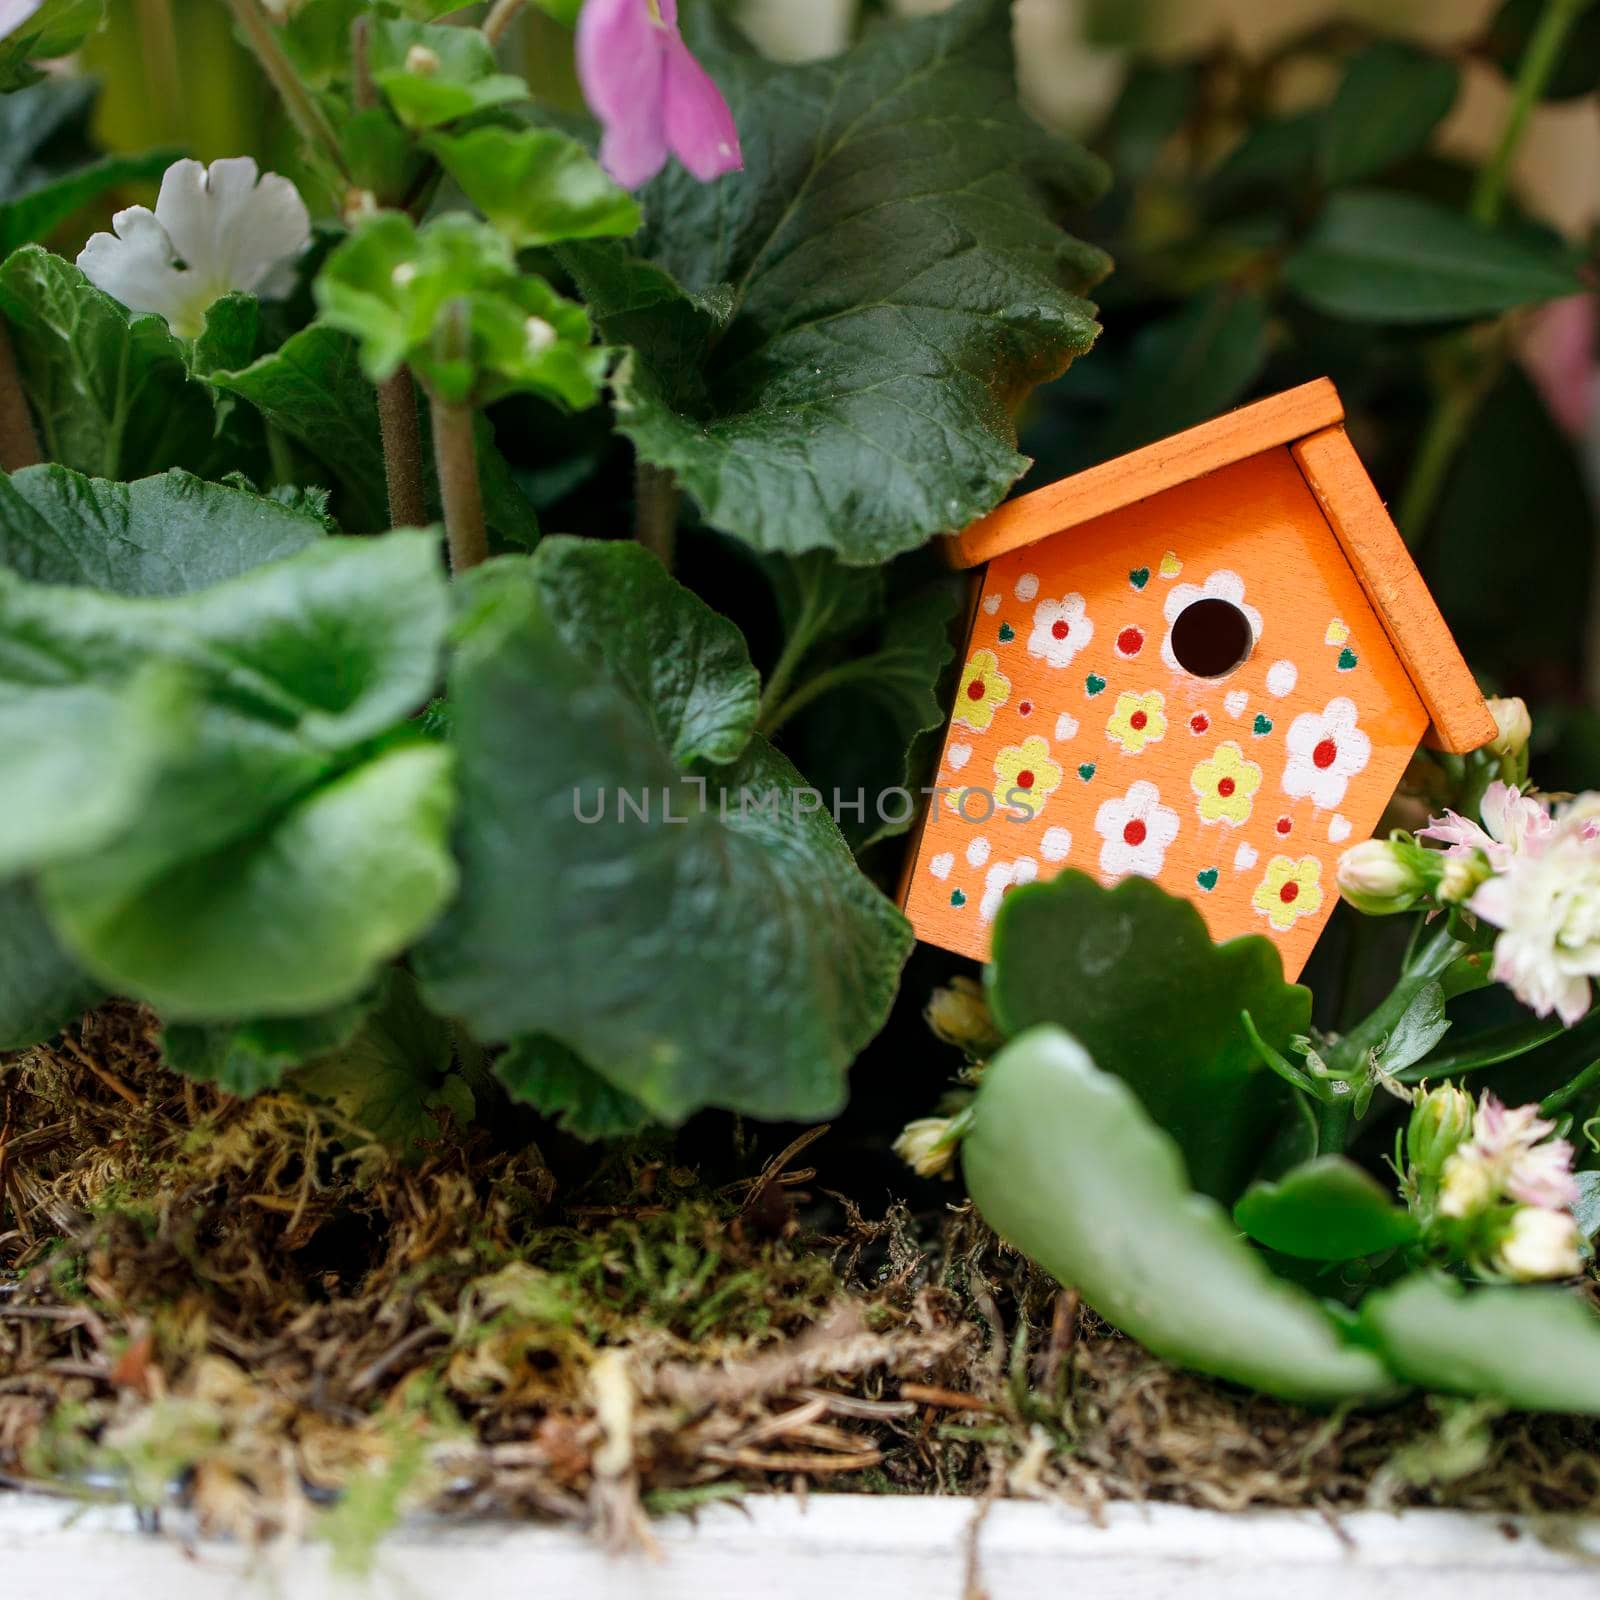 Small decorative orange birdhouse with red polka dots in primrose leaves